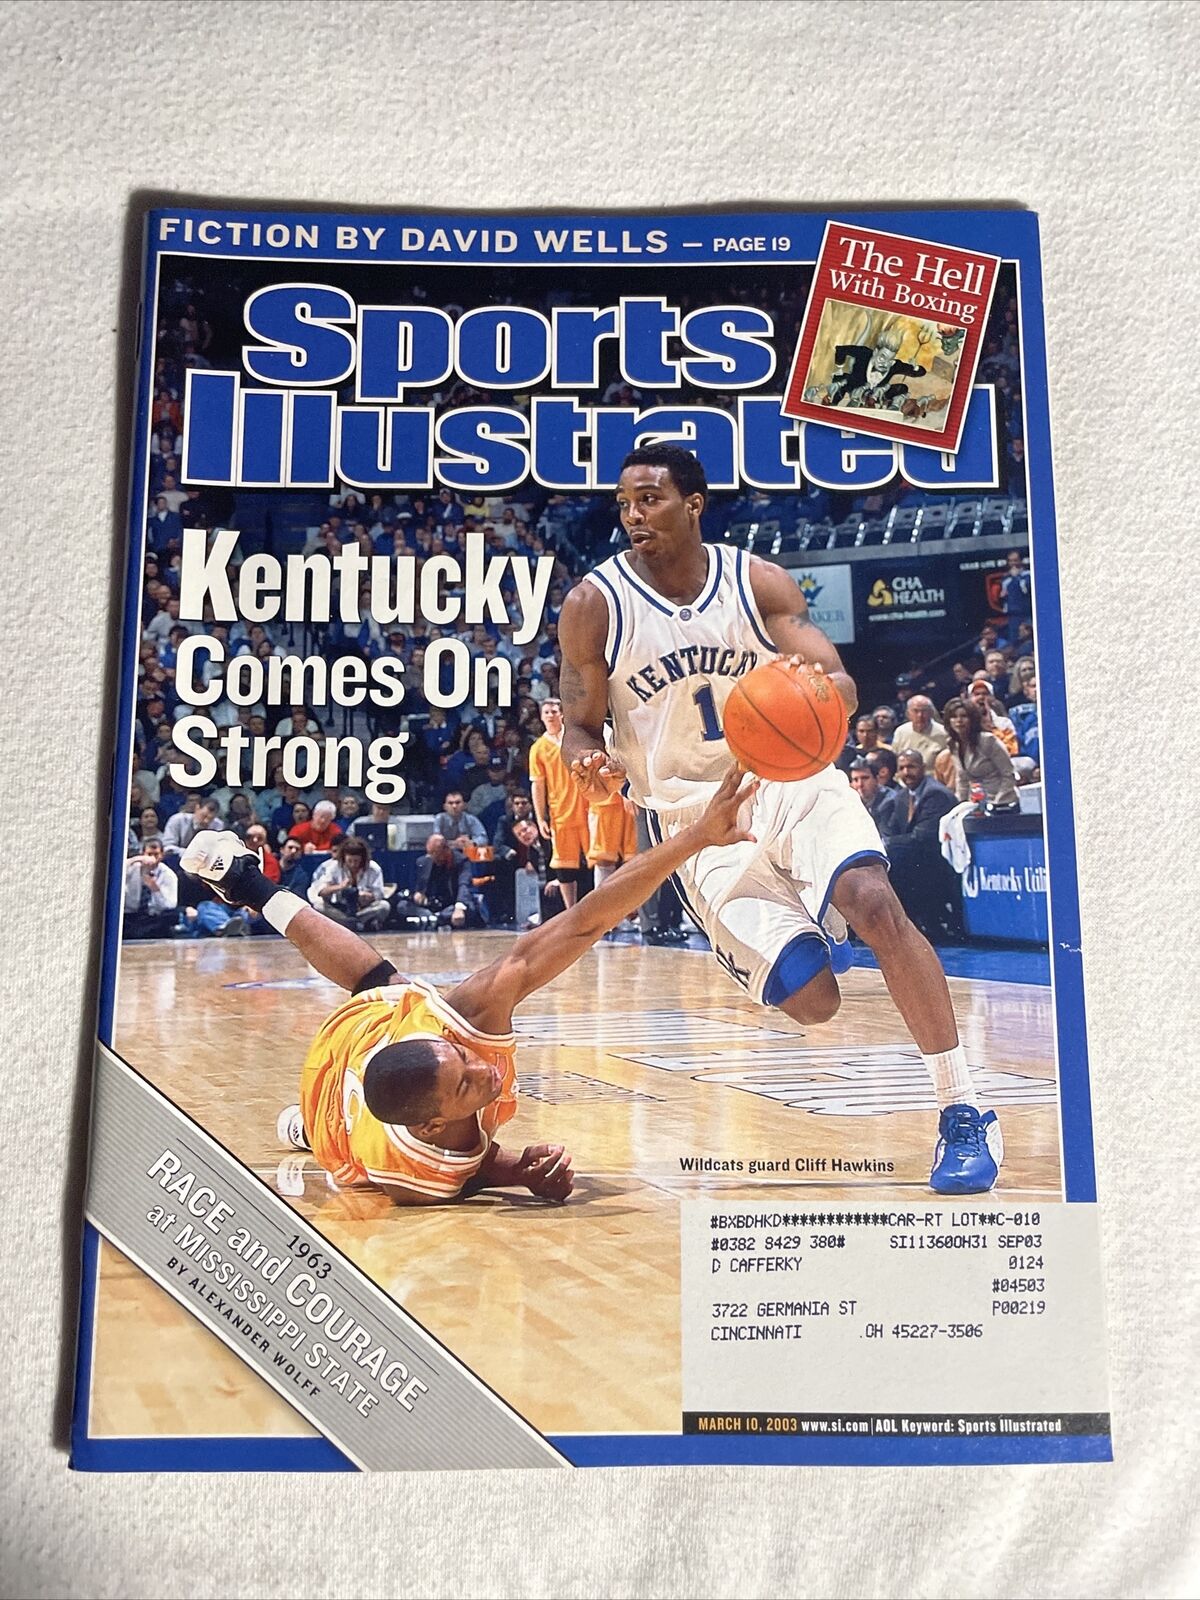 2010 March 10 Sports Illustrated Magazine, Kentucky comes on strong  (CP246)